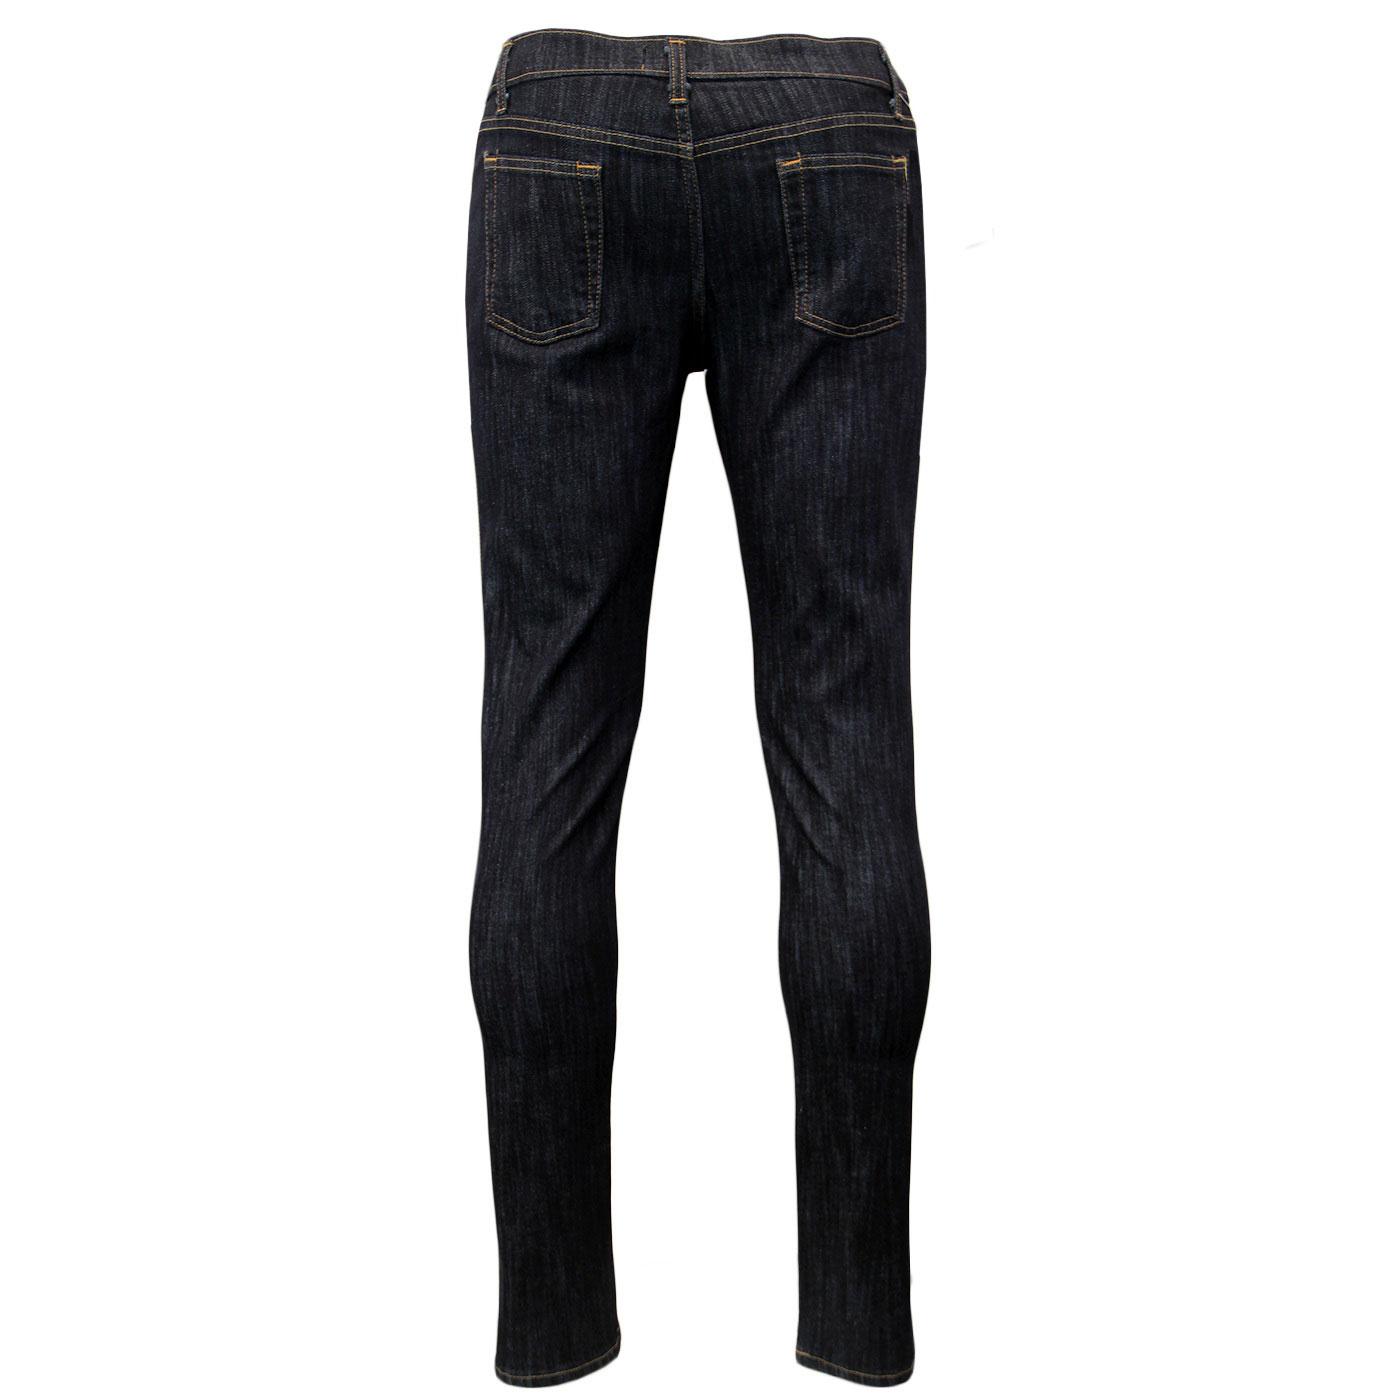 Abandonment Meeting Easygoing Draytone Drainpipe Jeans | MADCAP ENGLAND Retro Mod Skinny Jeans